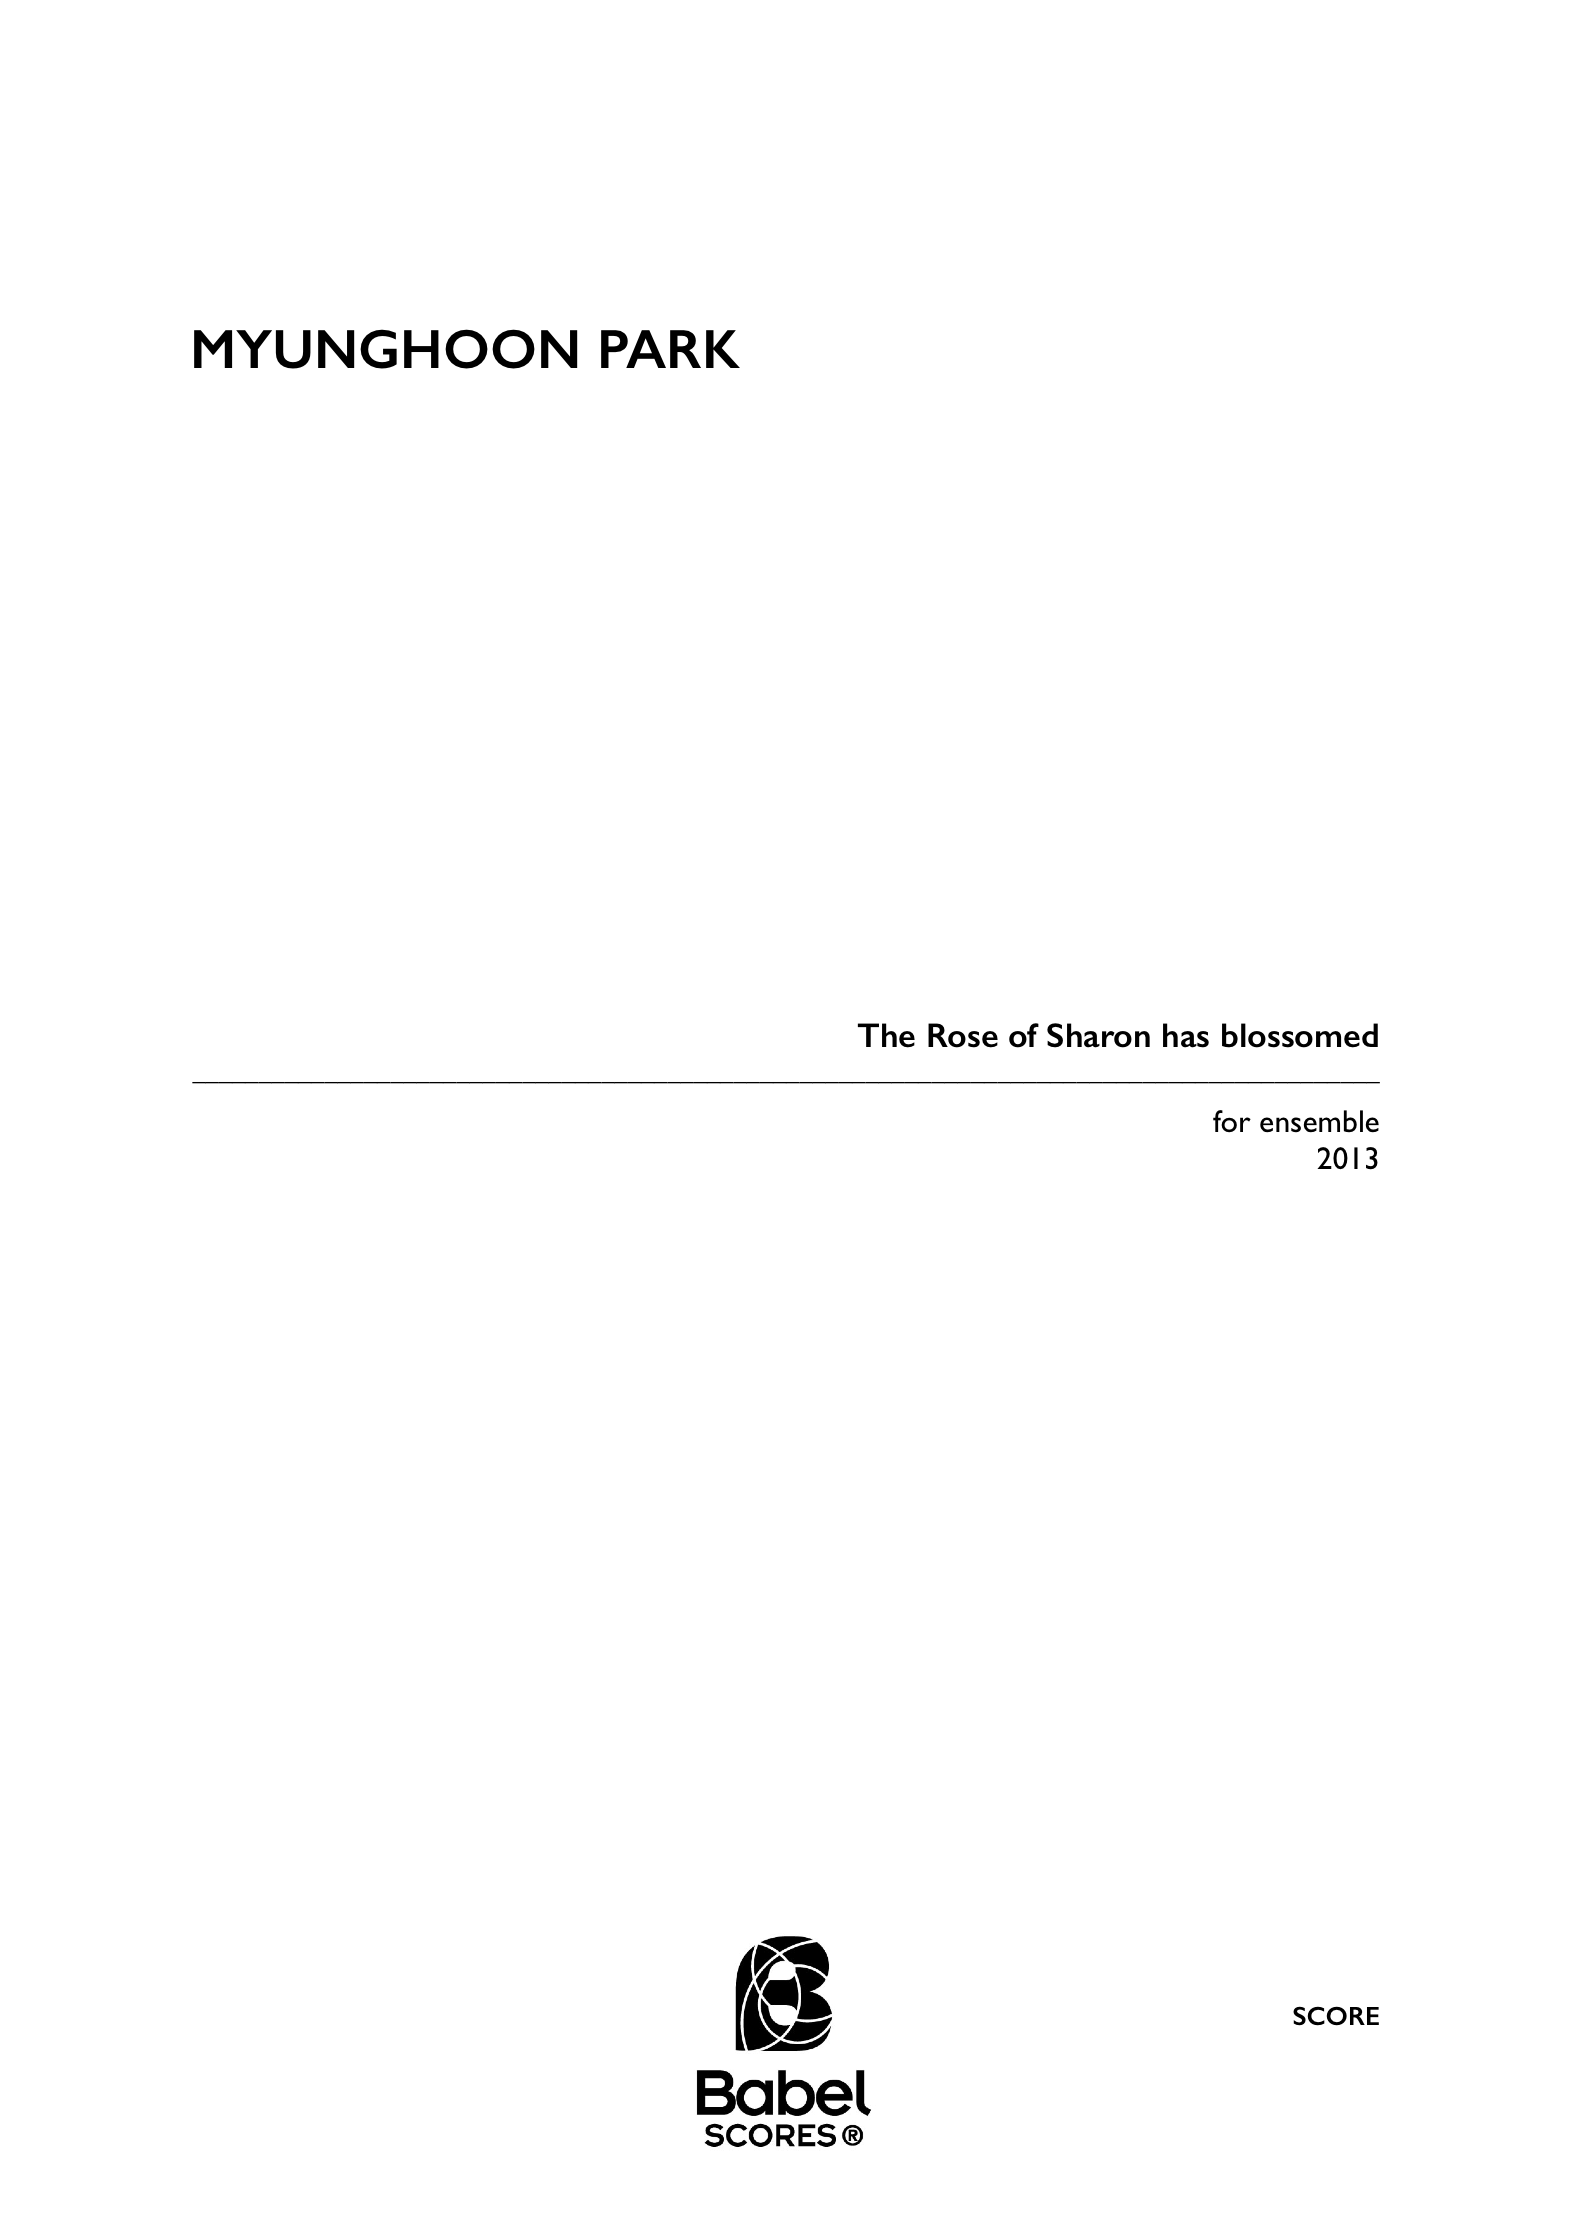 Score the rose of sharon has blossomed for ensemble Myunghoon Park A4 z